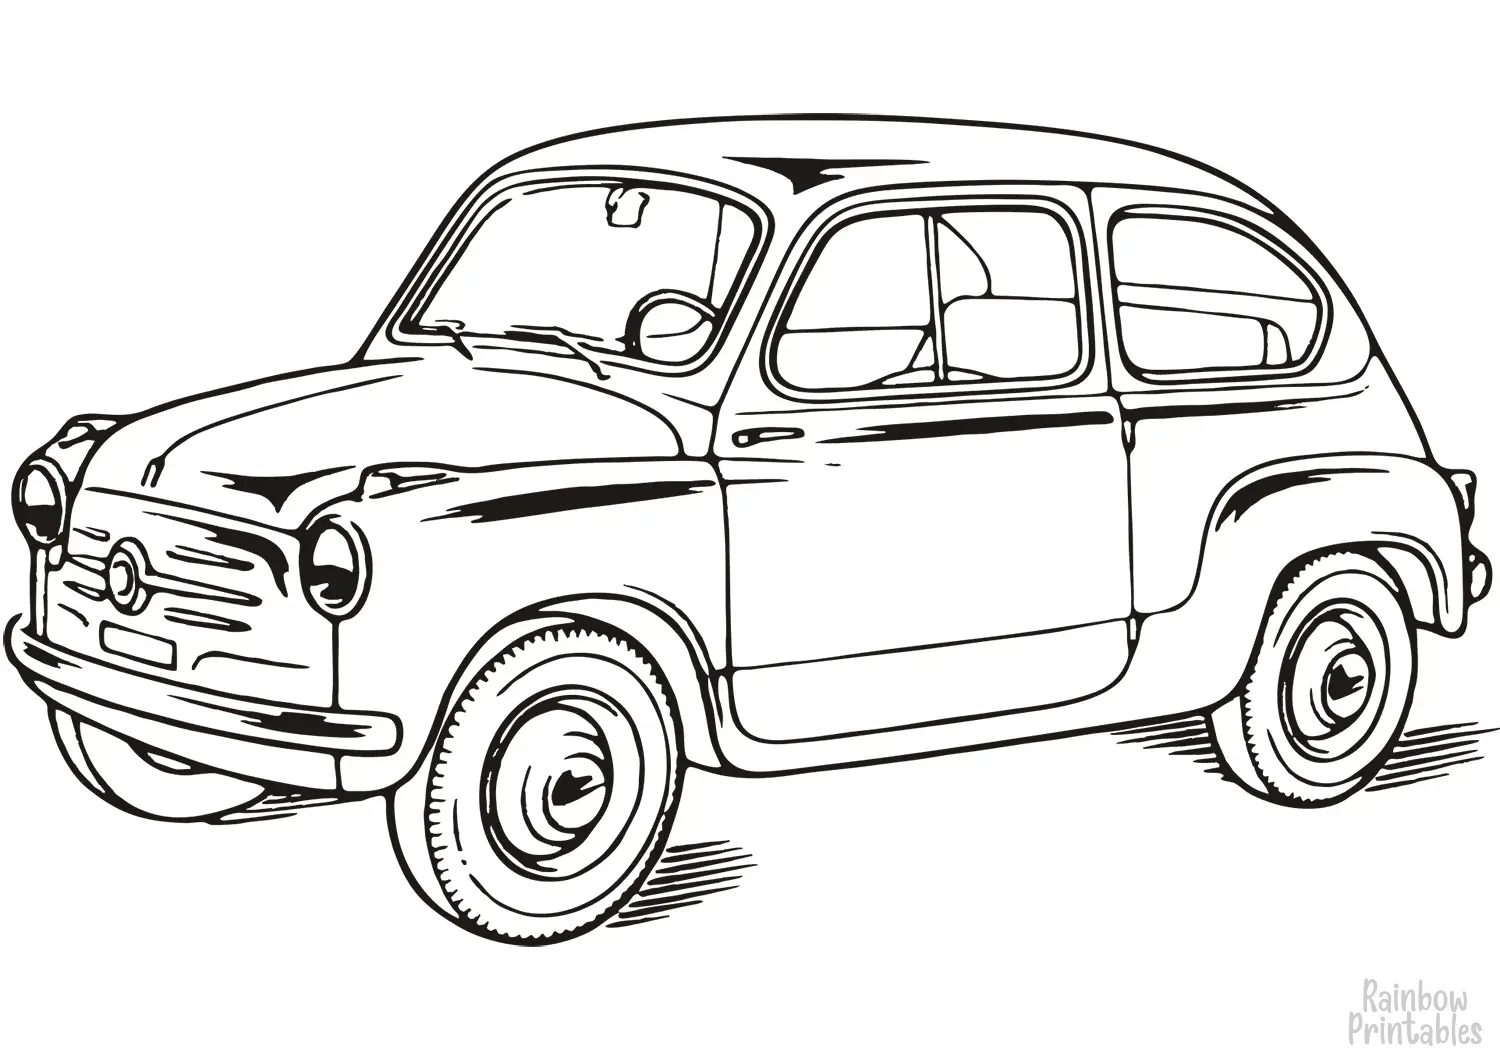 FIAT 600 Clipart Coloring Pages for Kids Adults Art Activities Line Art